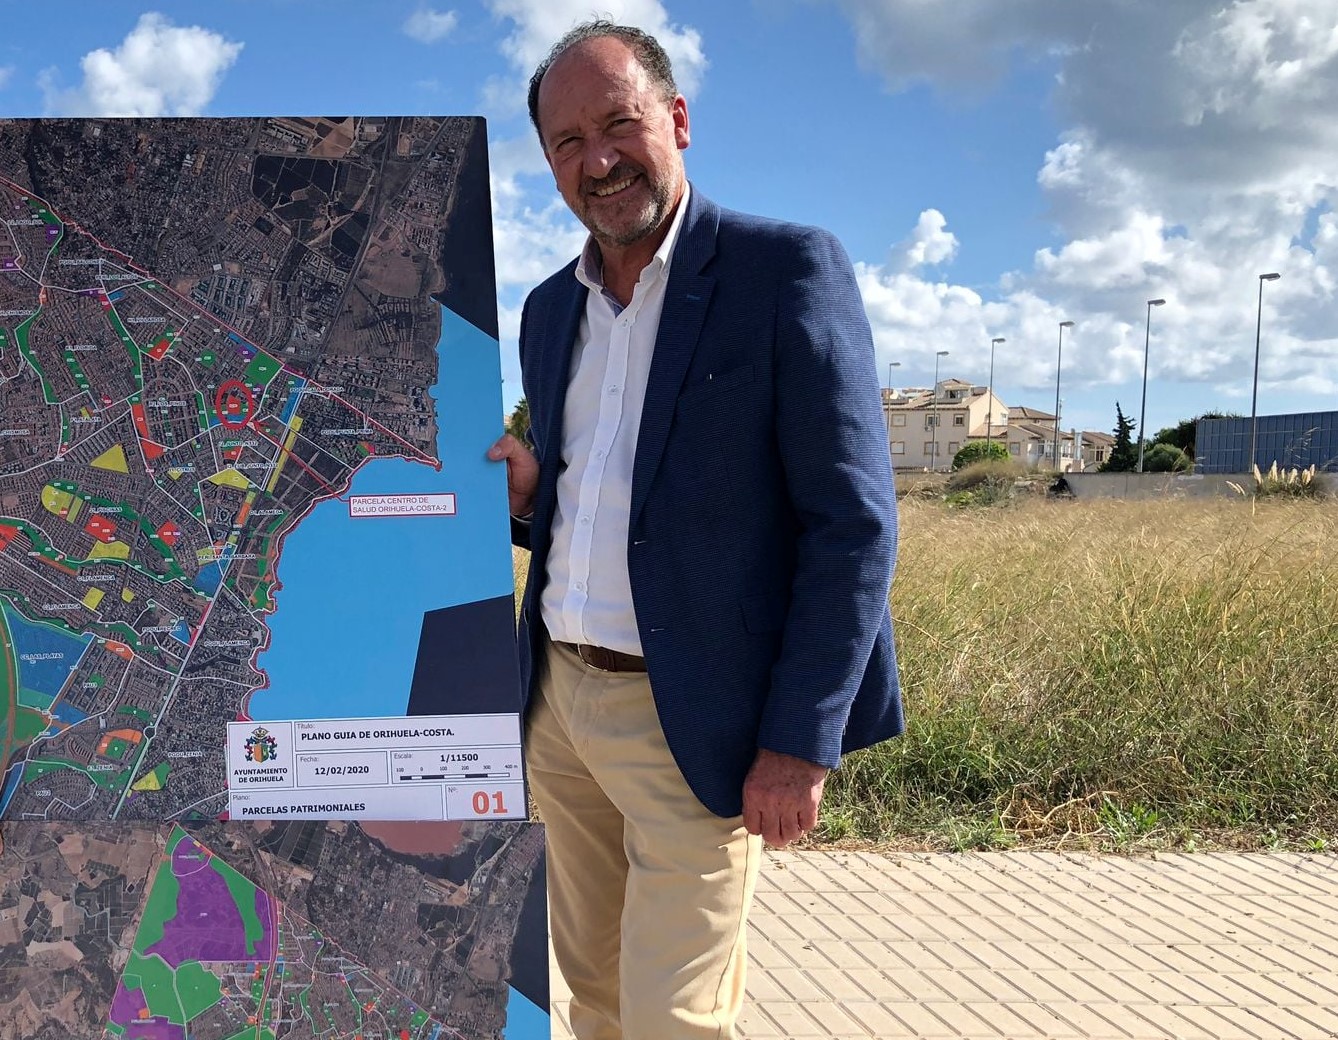 Mayor of expat and tourist area on Spain's Costa Blanca attacks 15-month silence over land offer for a new medical centre